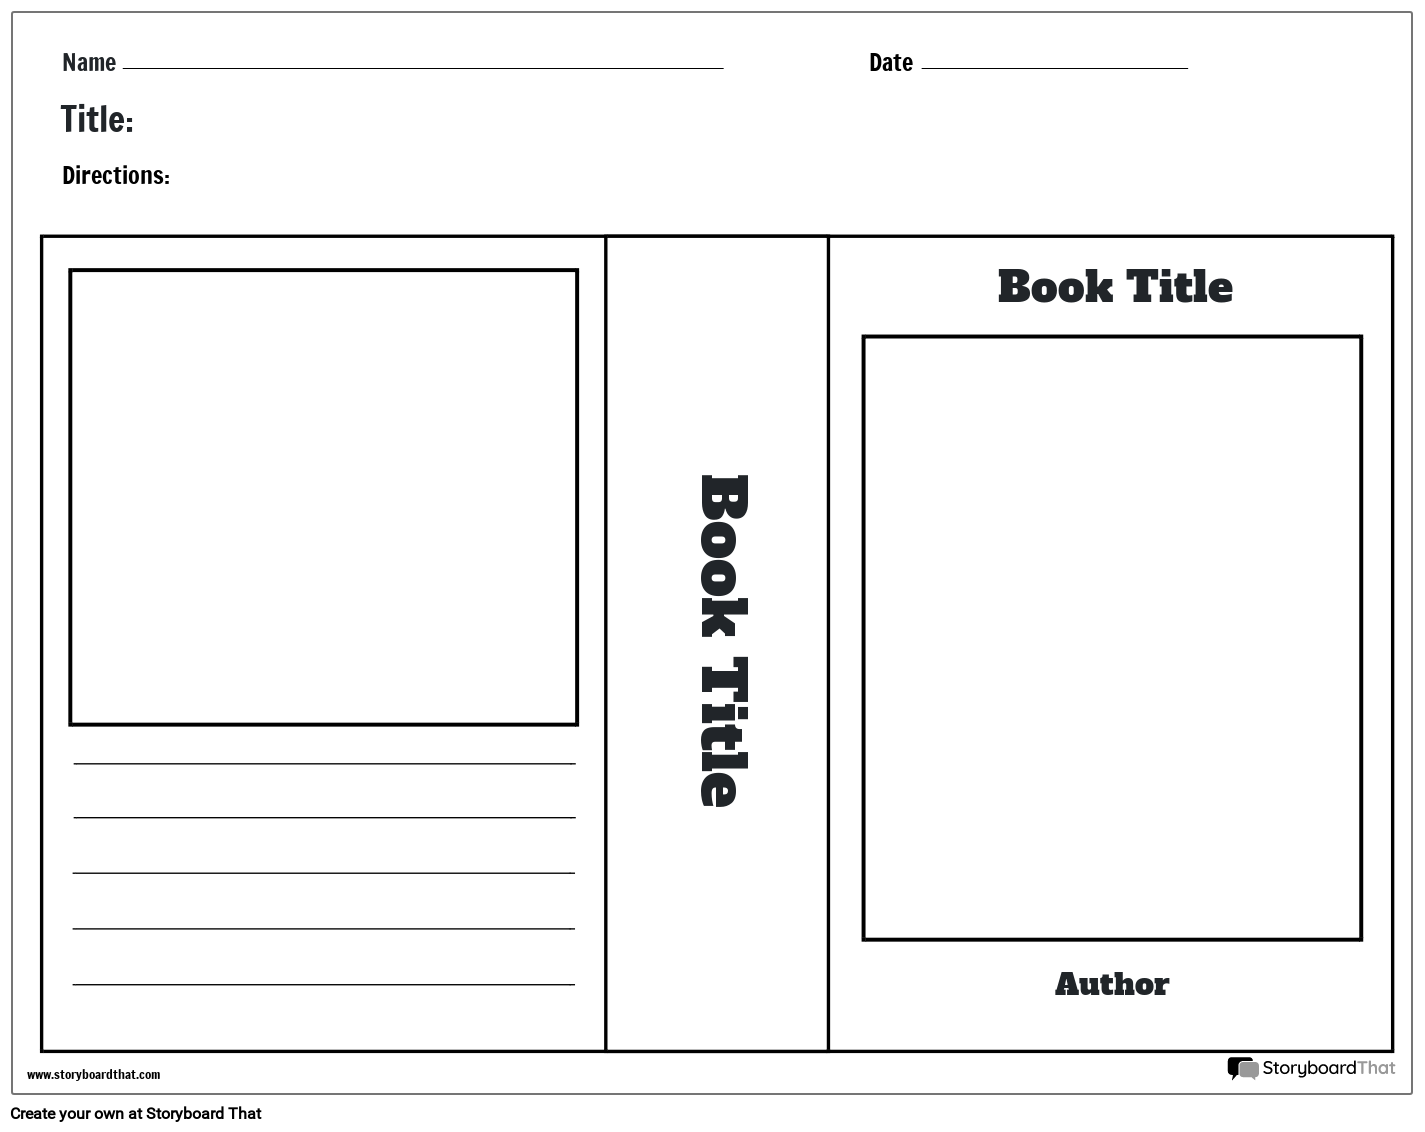 Simple Directed Double-Sided Book Jacket Worksheet Template